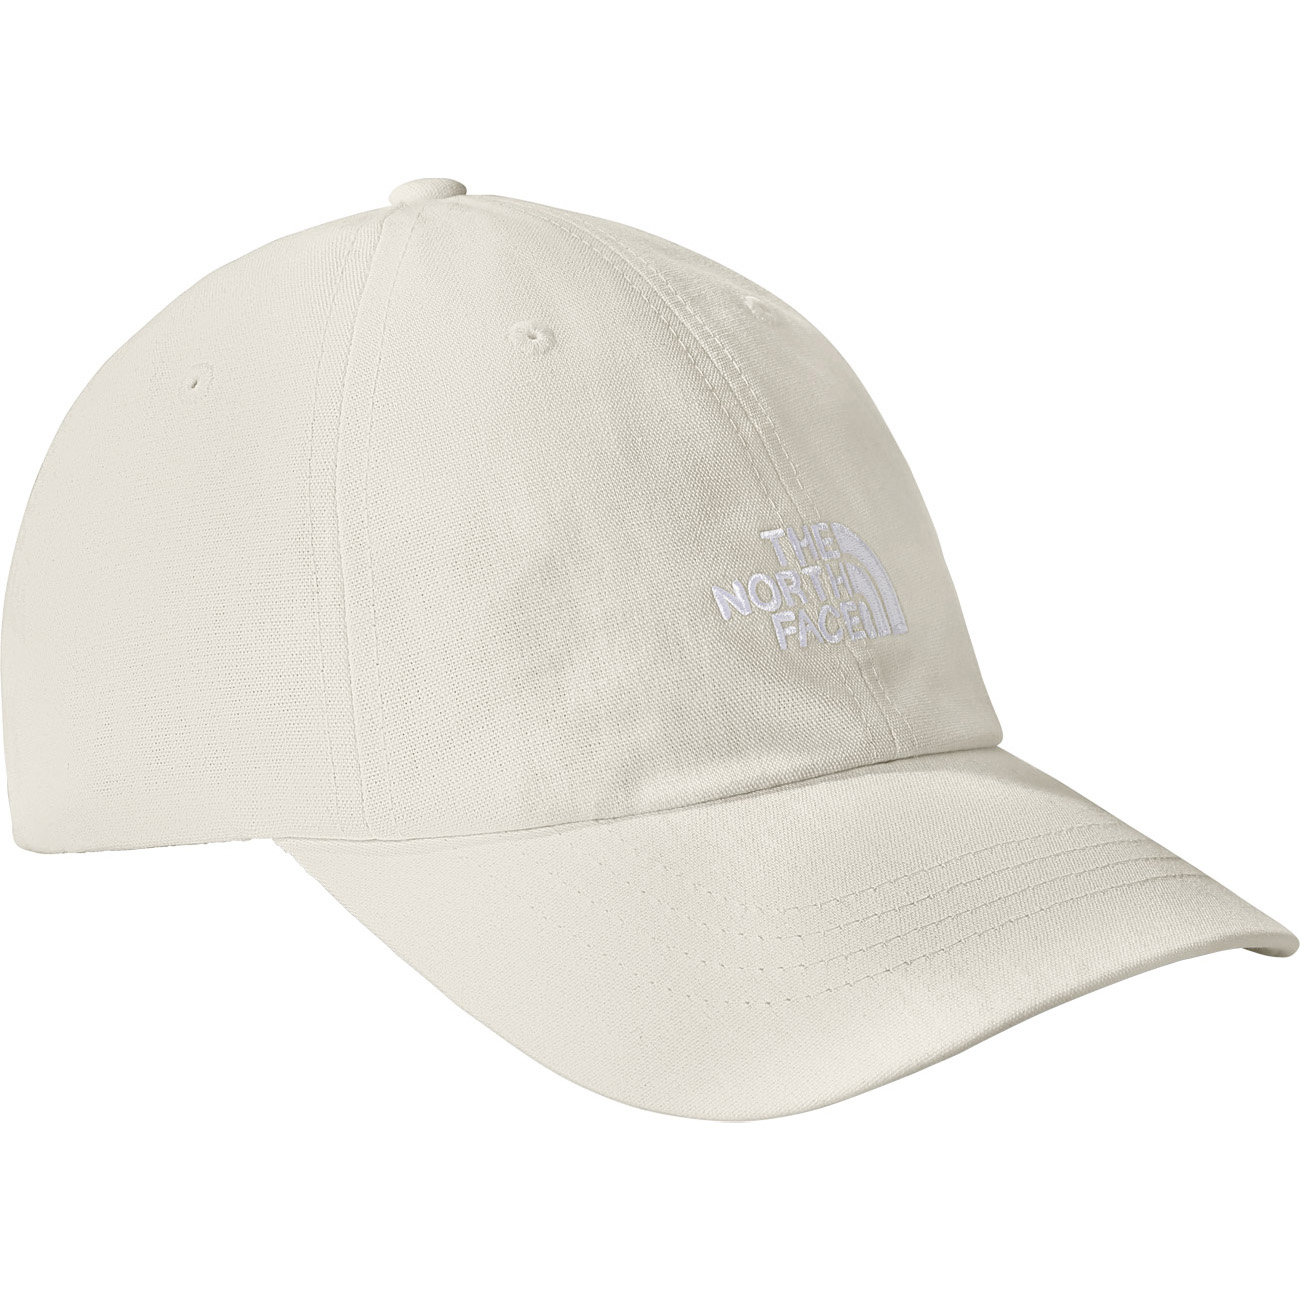 The North Face Cap Norm Hat von The North Face